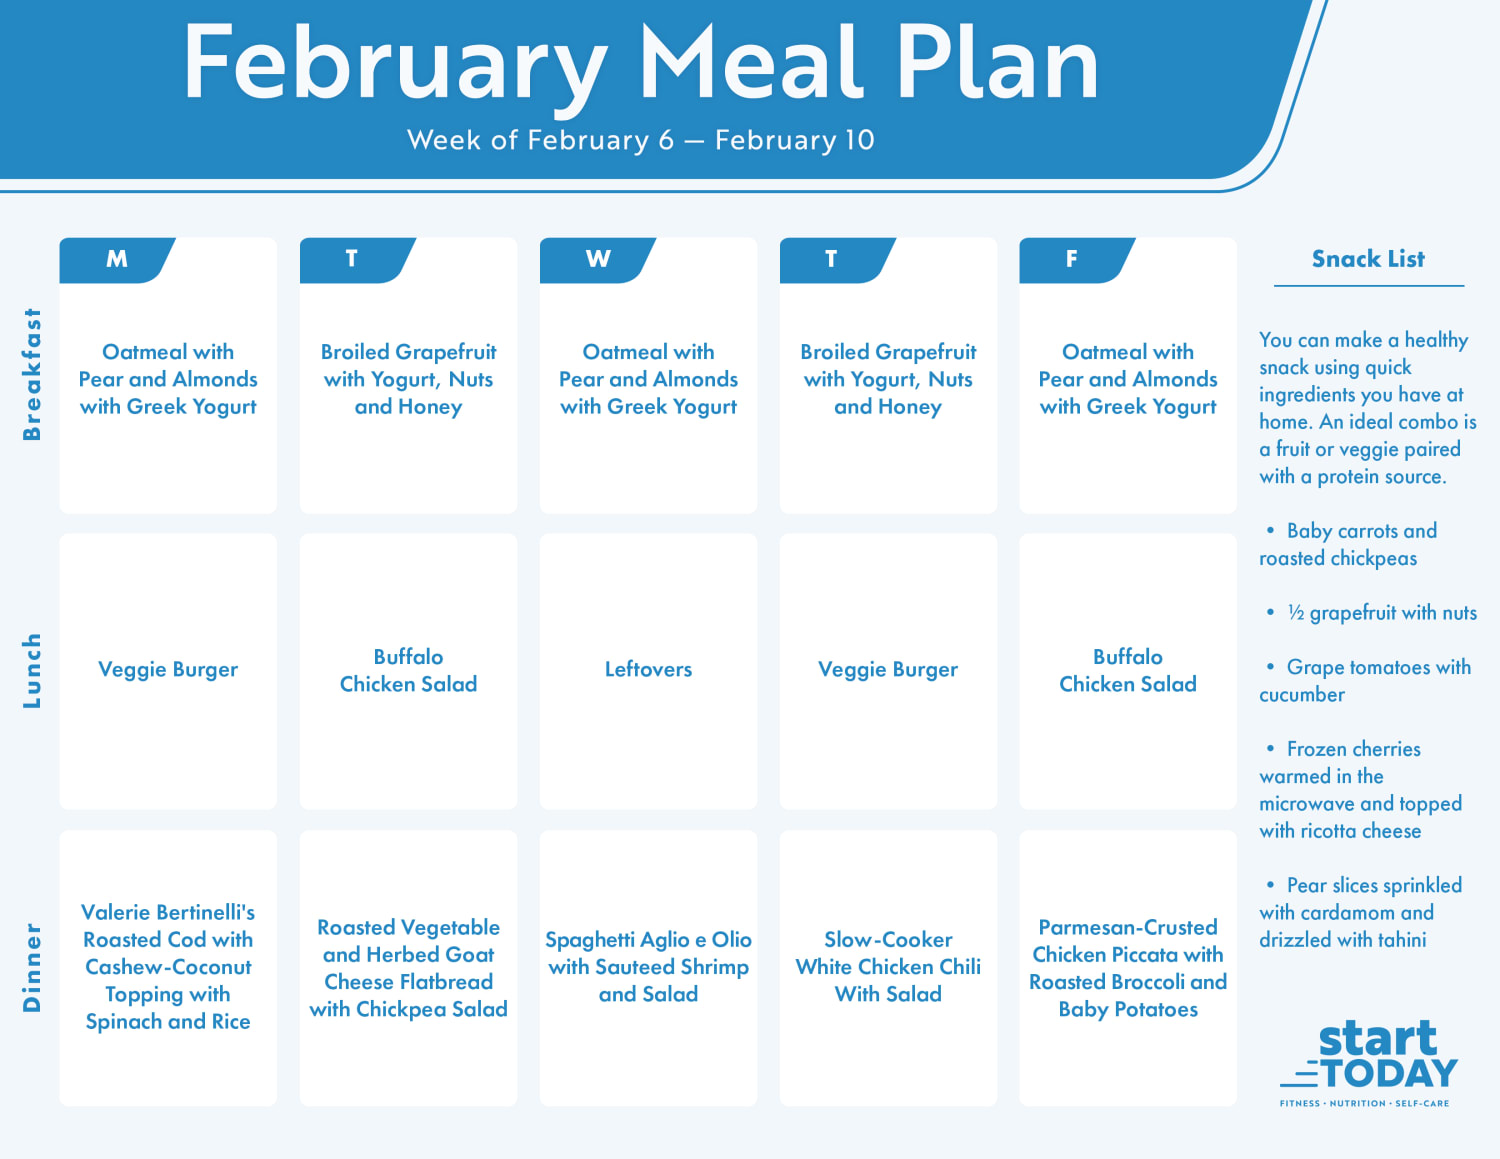 How to Meal Plan: A Beginner's Guide